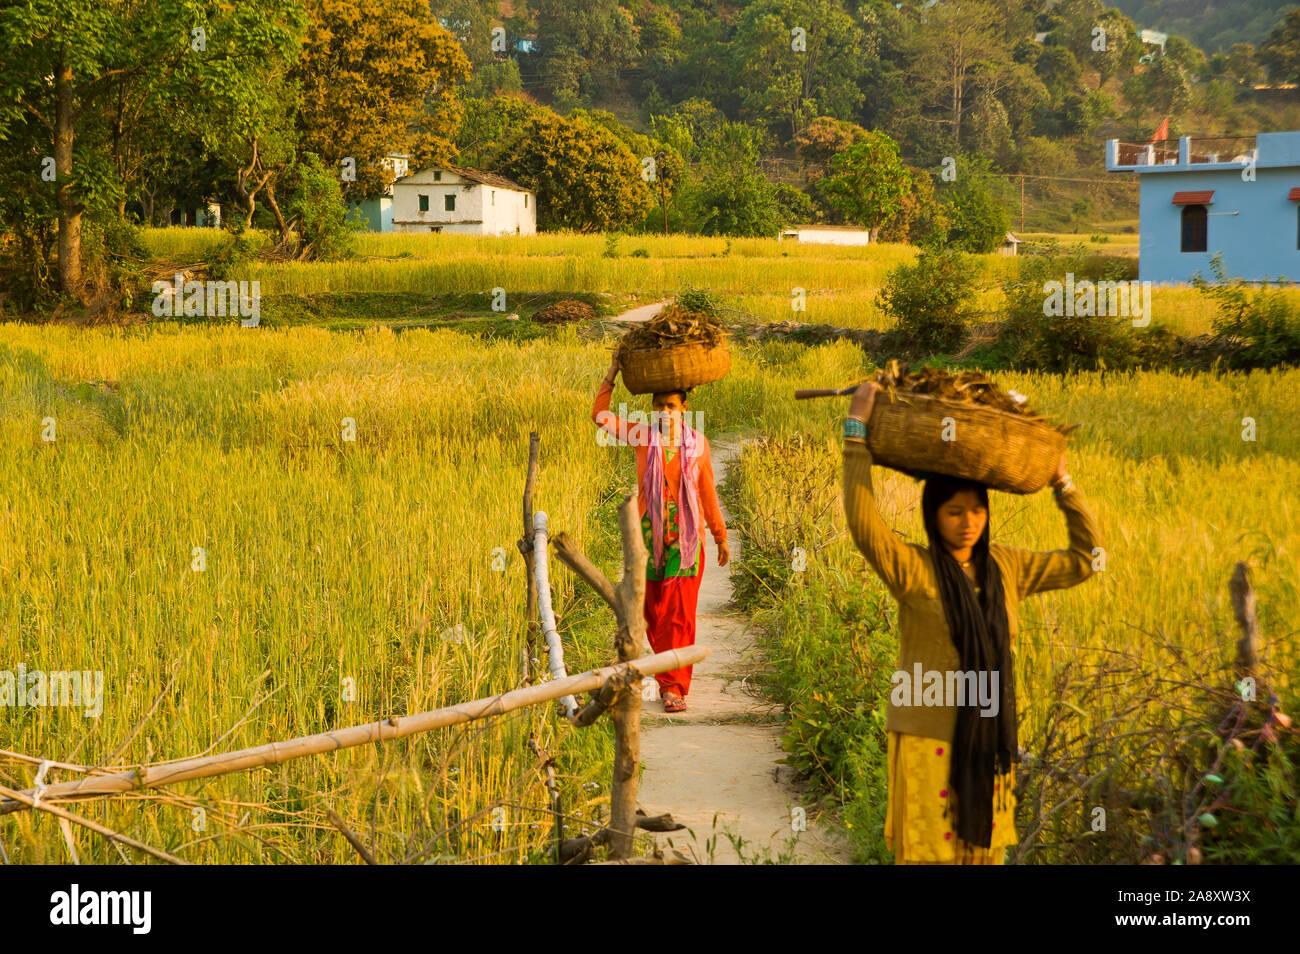 Indian Woman In Raditional Clothes Carrying Baskets Full Of Firewood On A Remote Village On The 